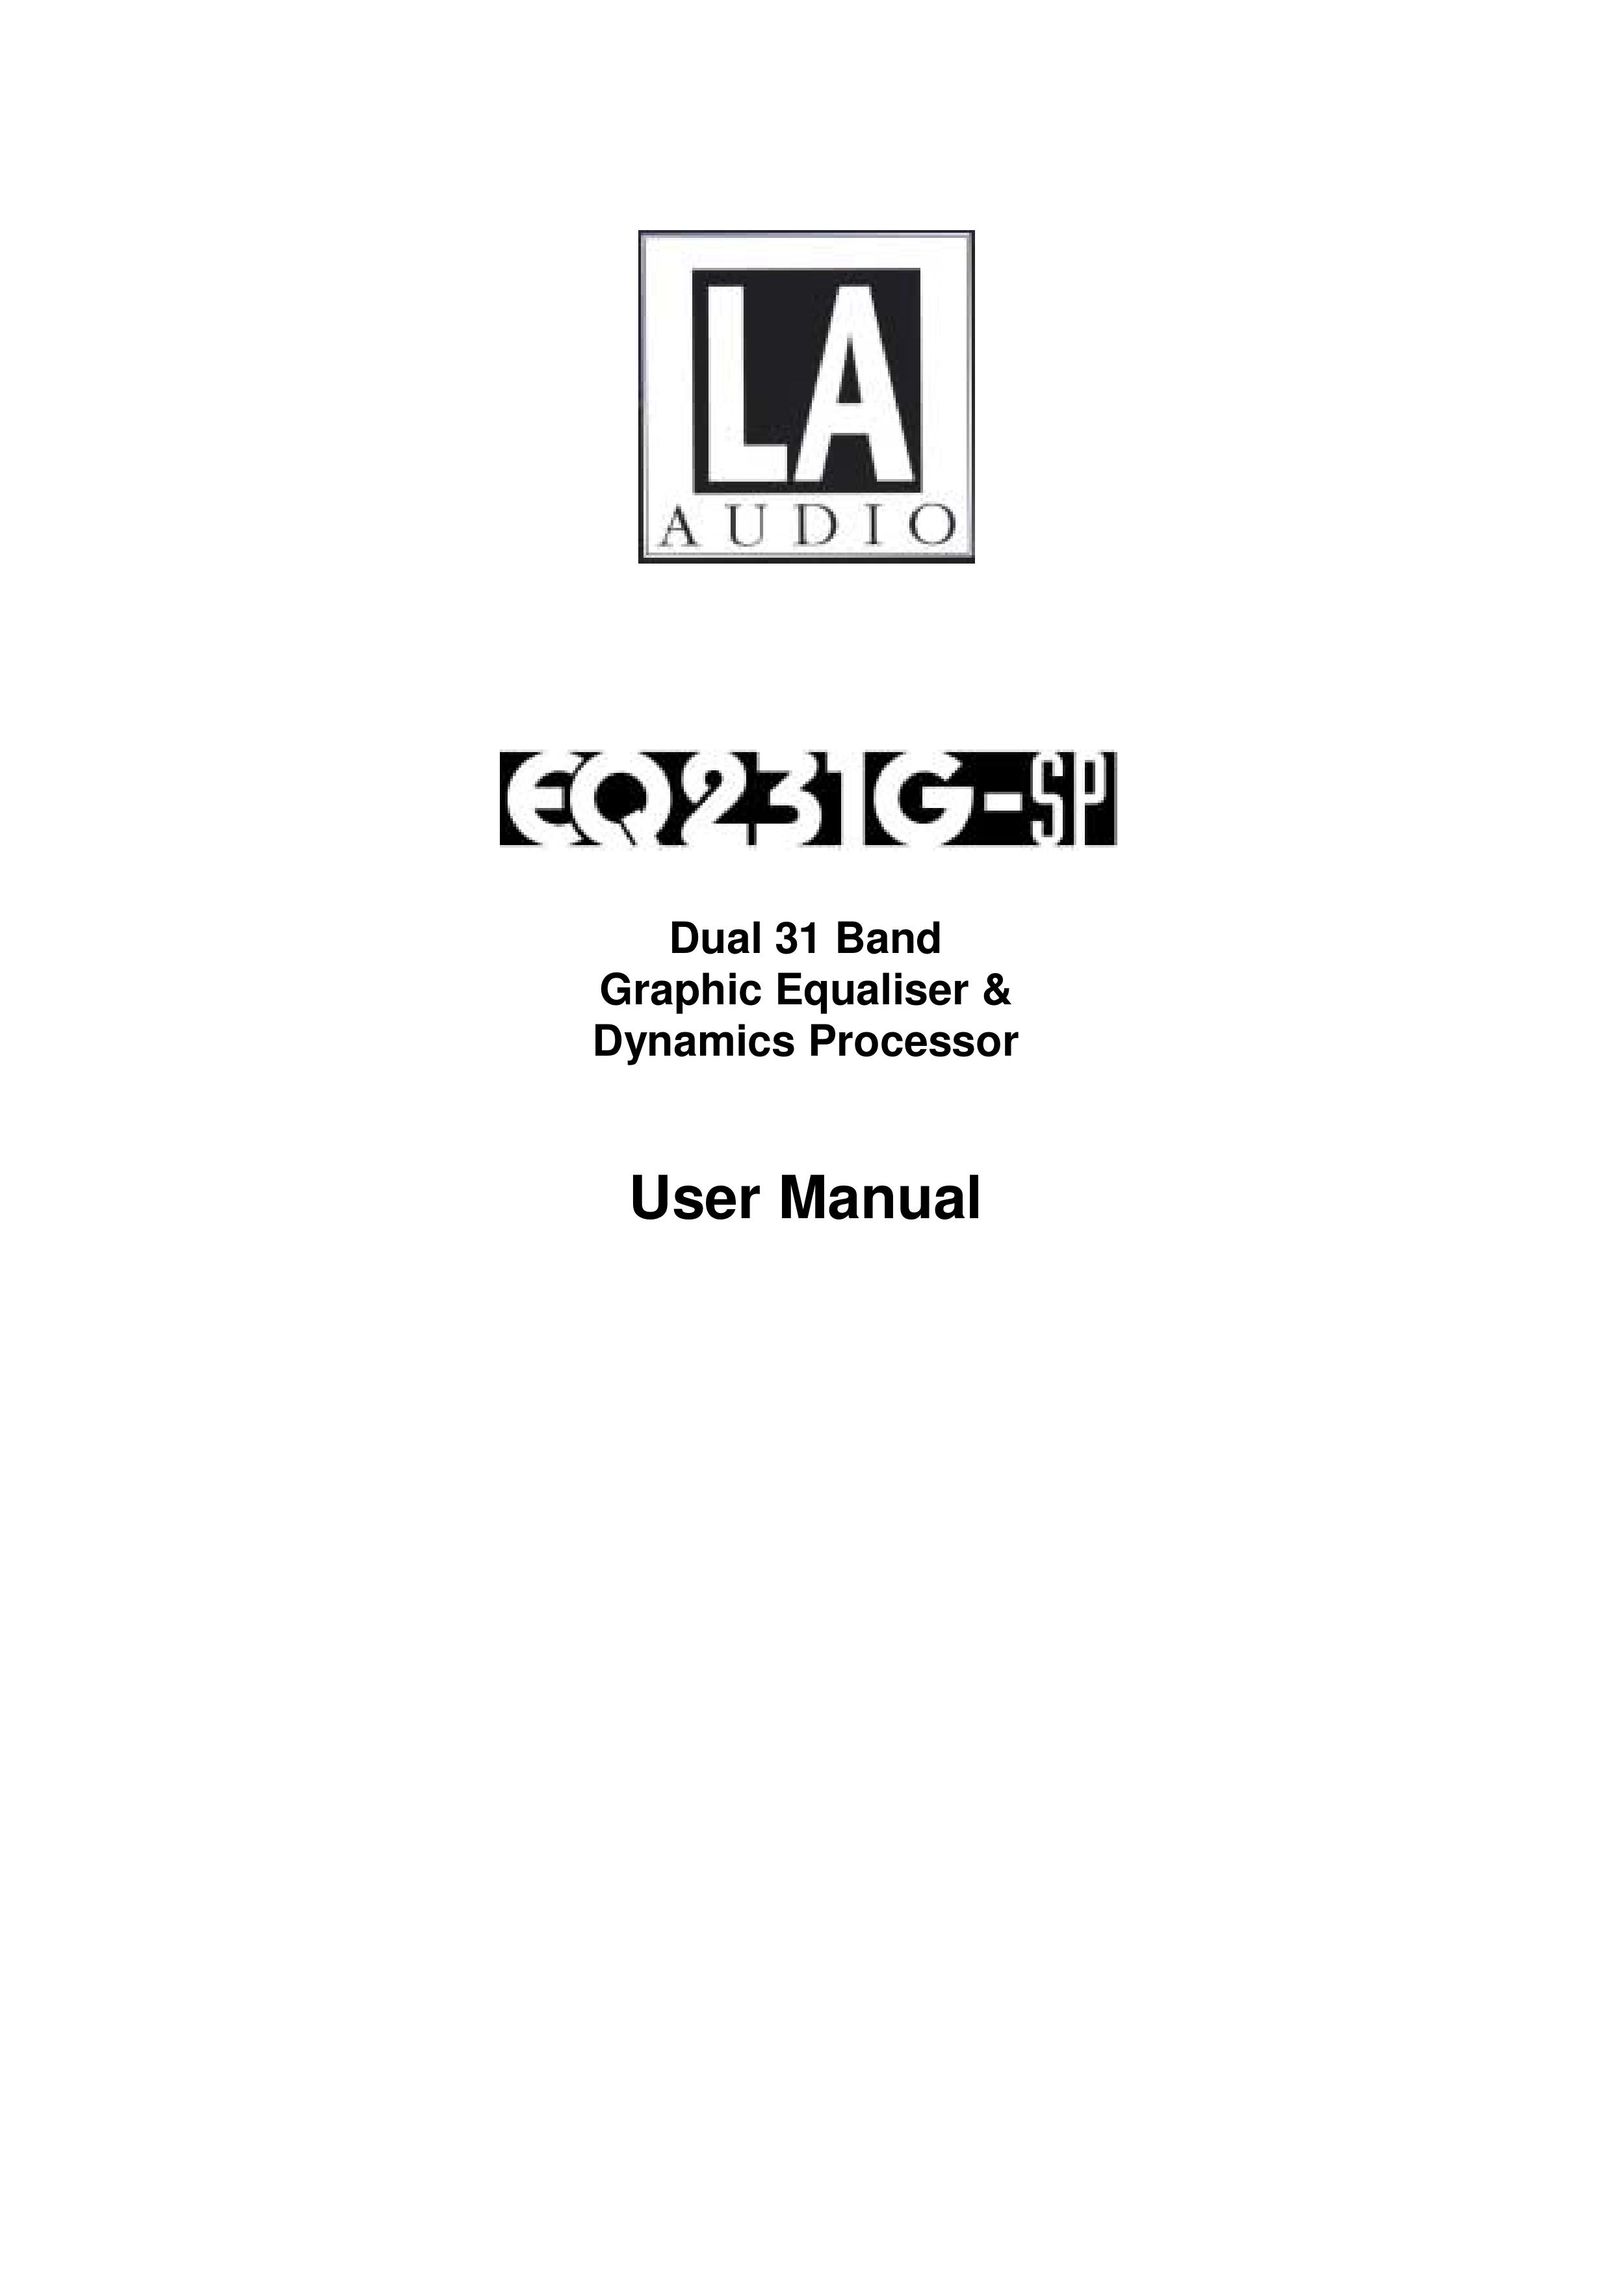 LA Audio Electronic EQ231G-SP Stereo Equalizer User Manual